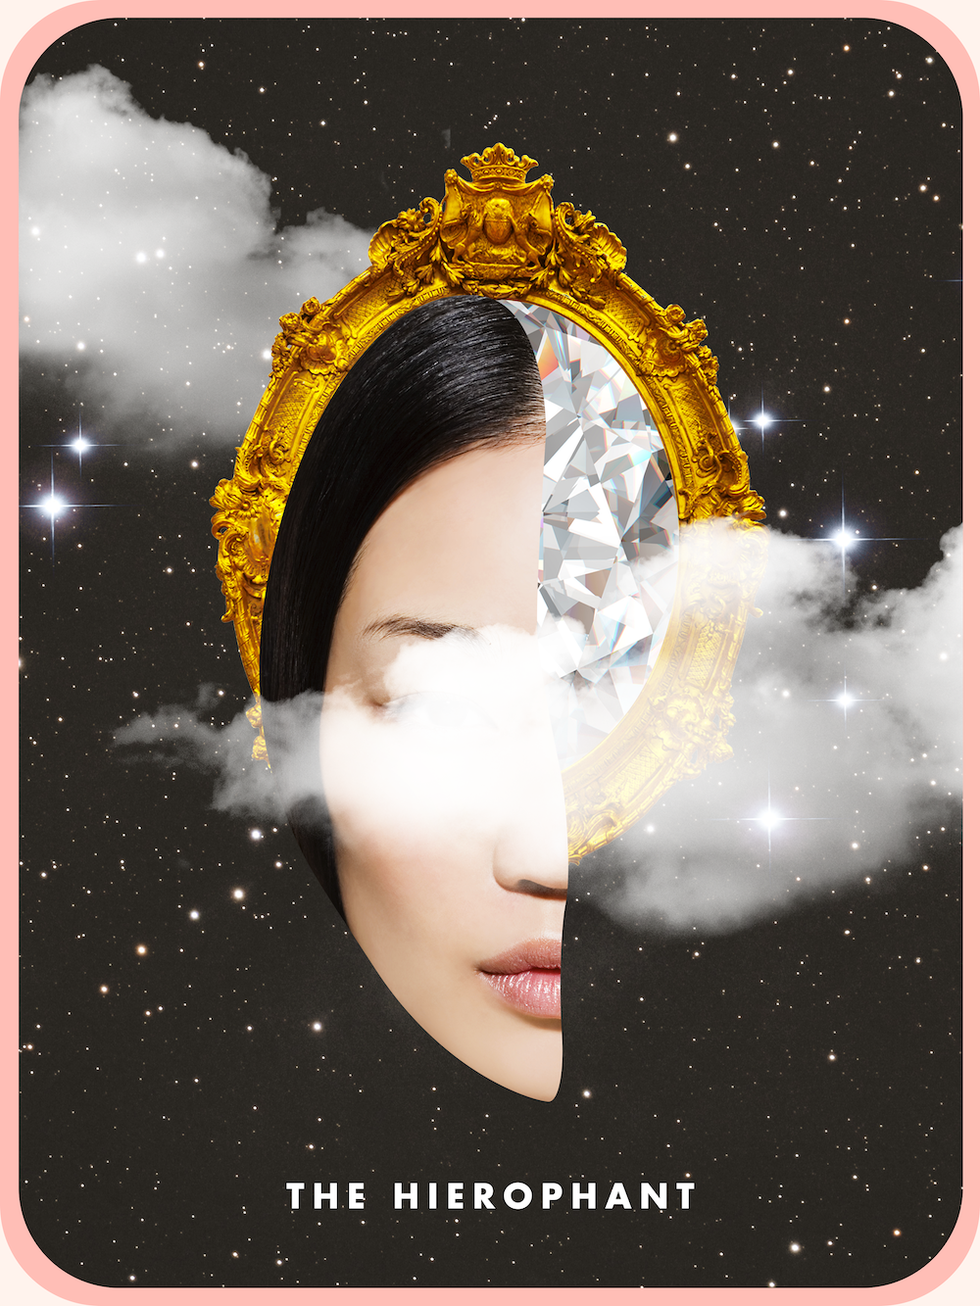 the tarot card the hierophant, showing half of a woman's face next to a diamond